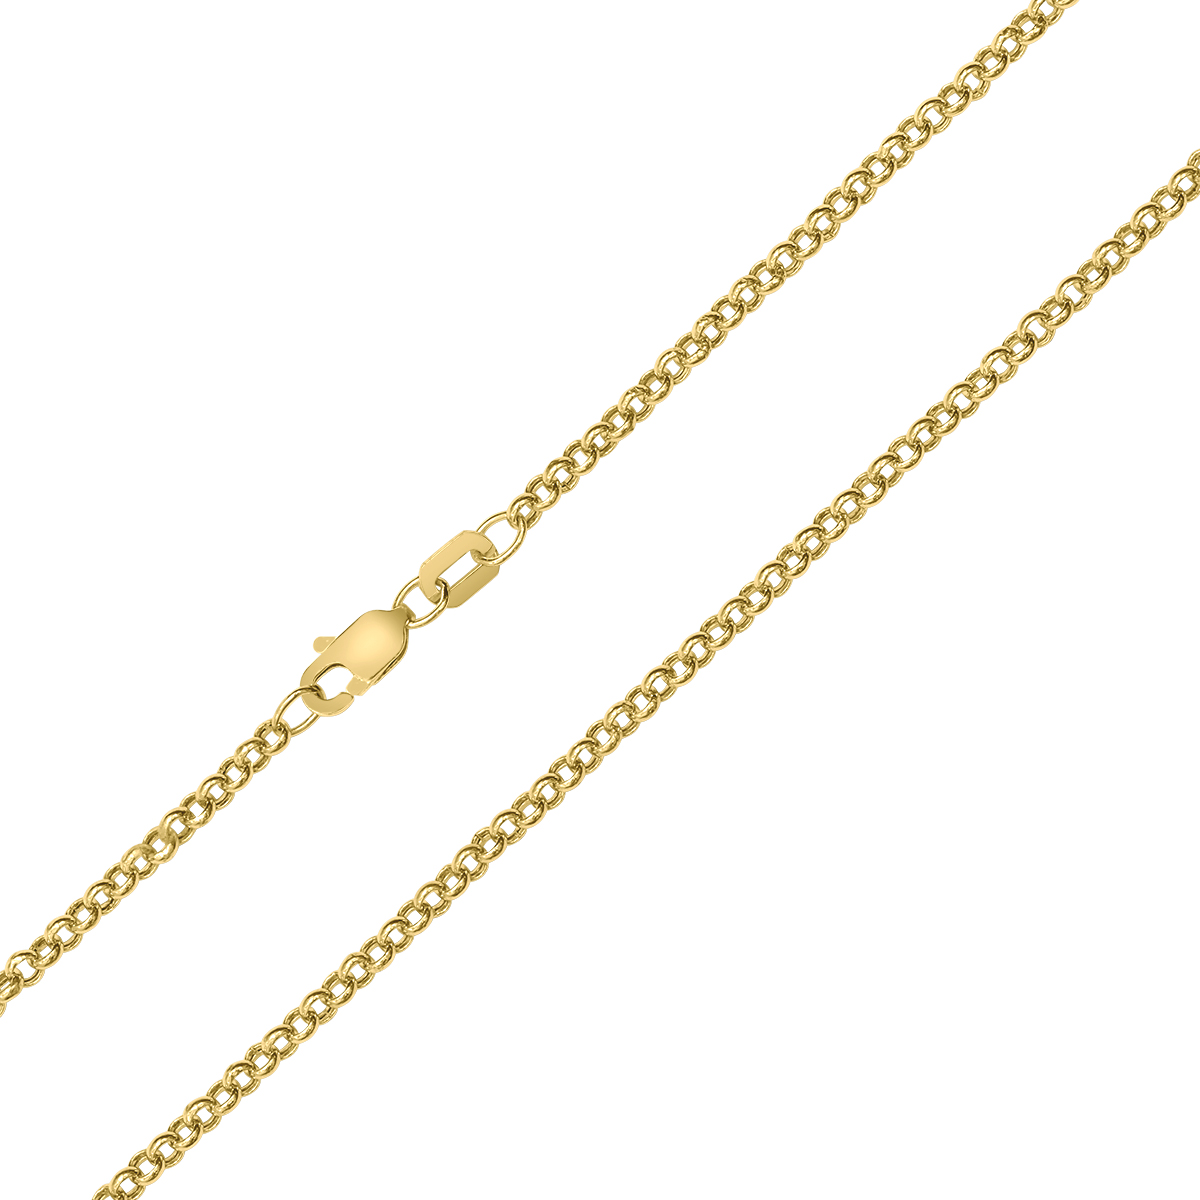 10K Yellow Gold 2.3MM Classic Rolo Chain with Lobster Clasp - 16 Inch